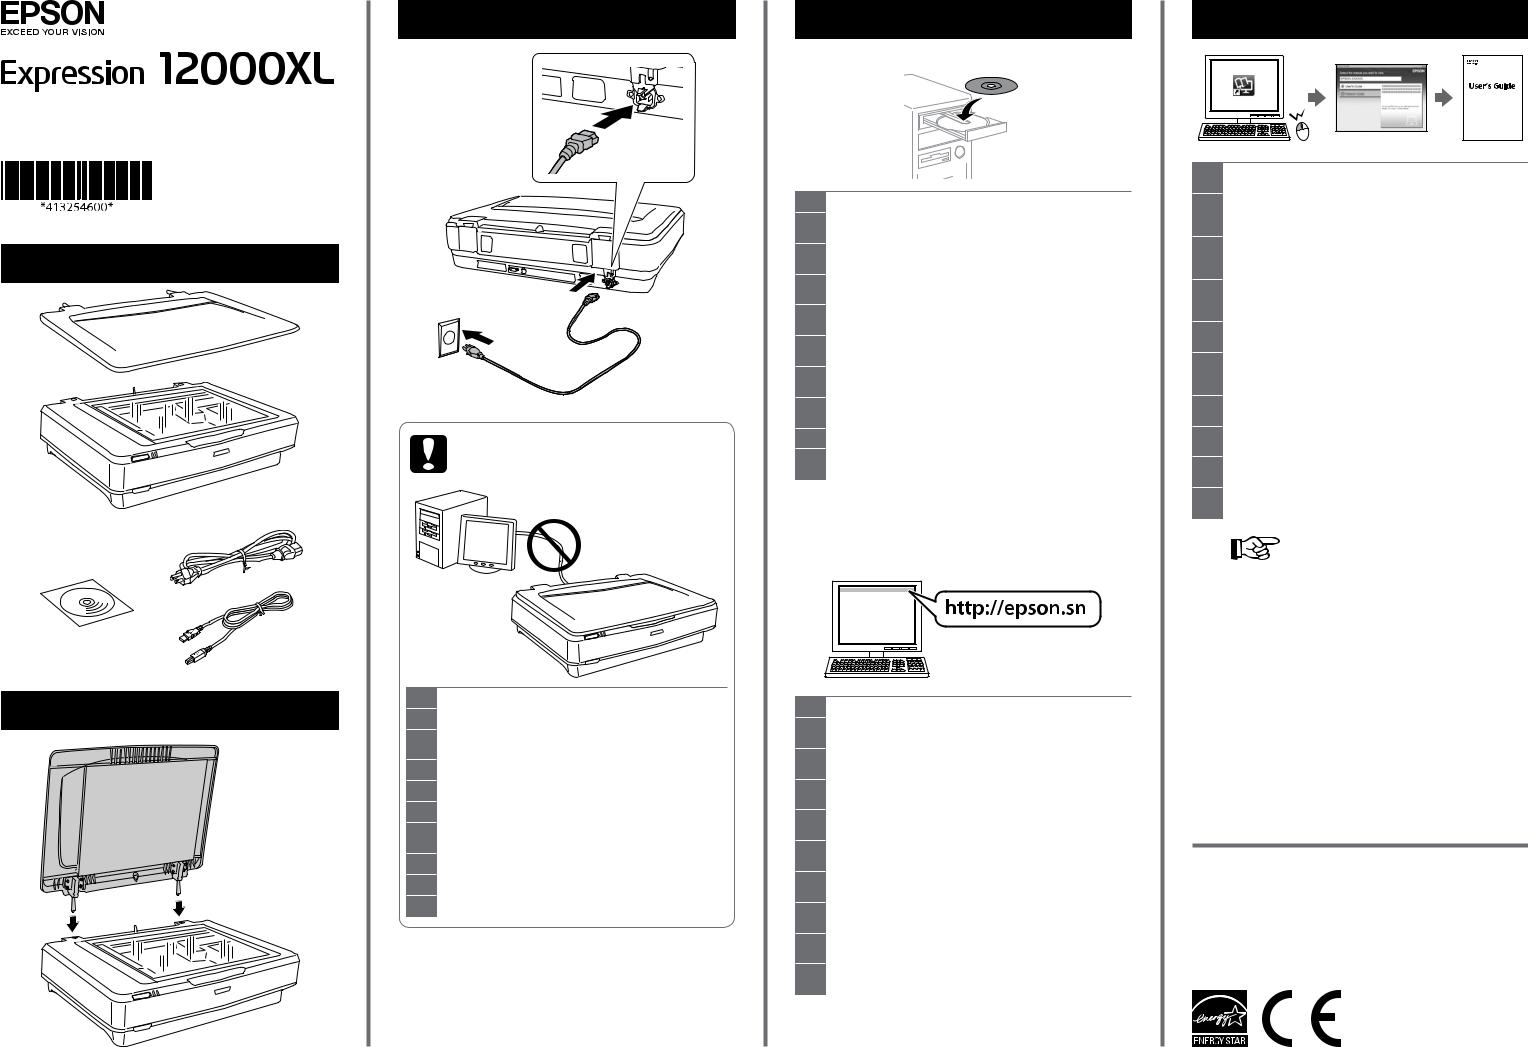 EPSON EXPRESSION 12000XL, EXPRESSION 12000XL PRO User Manual